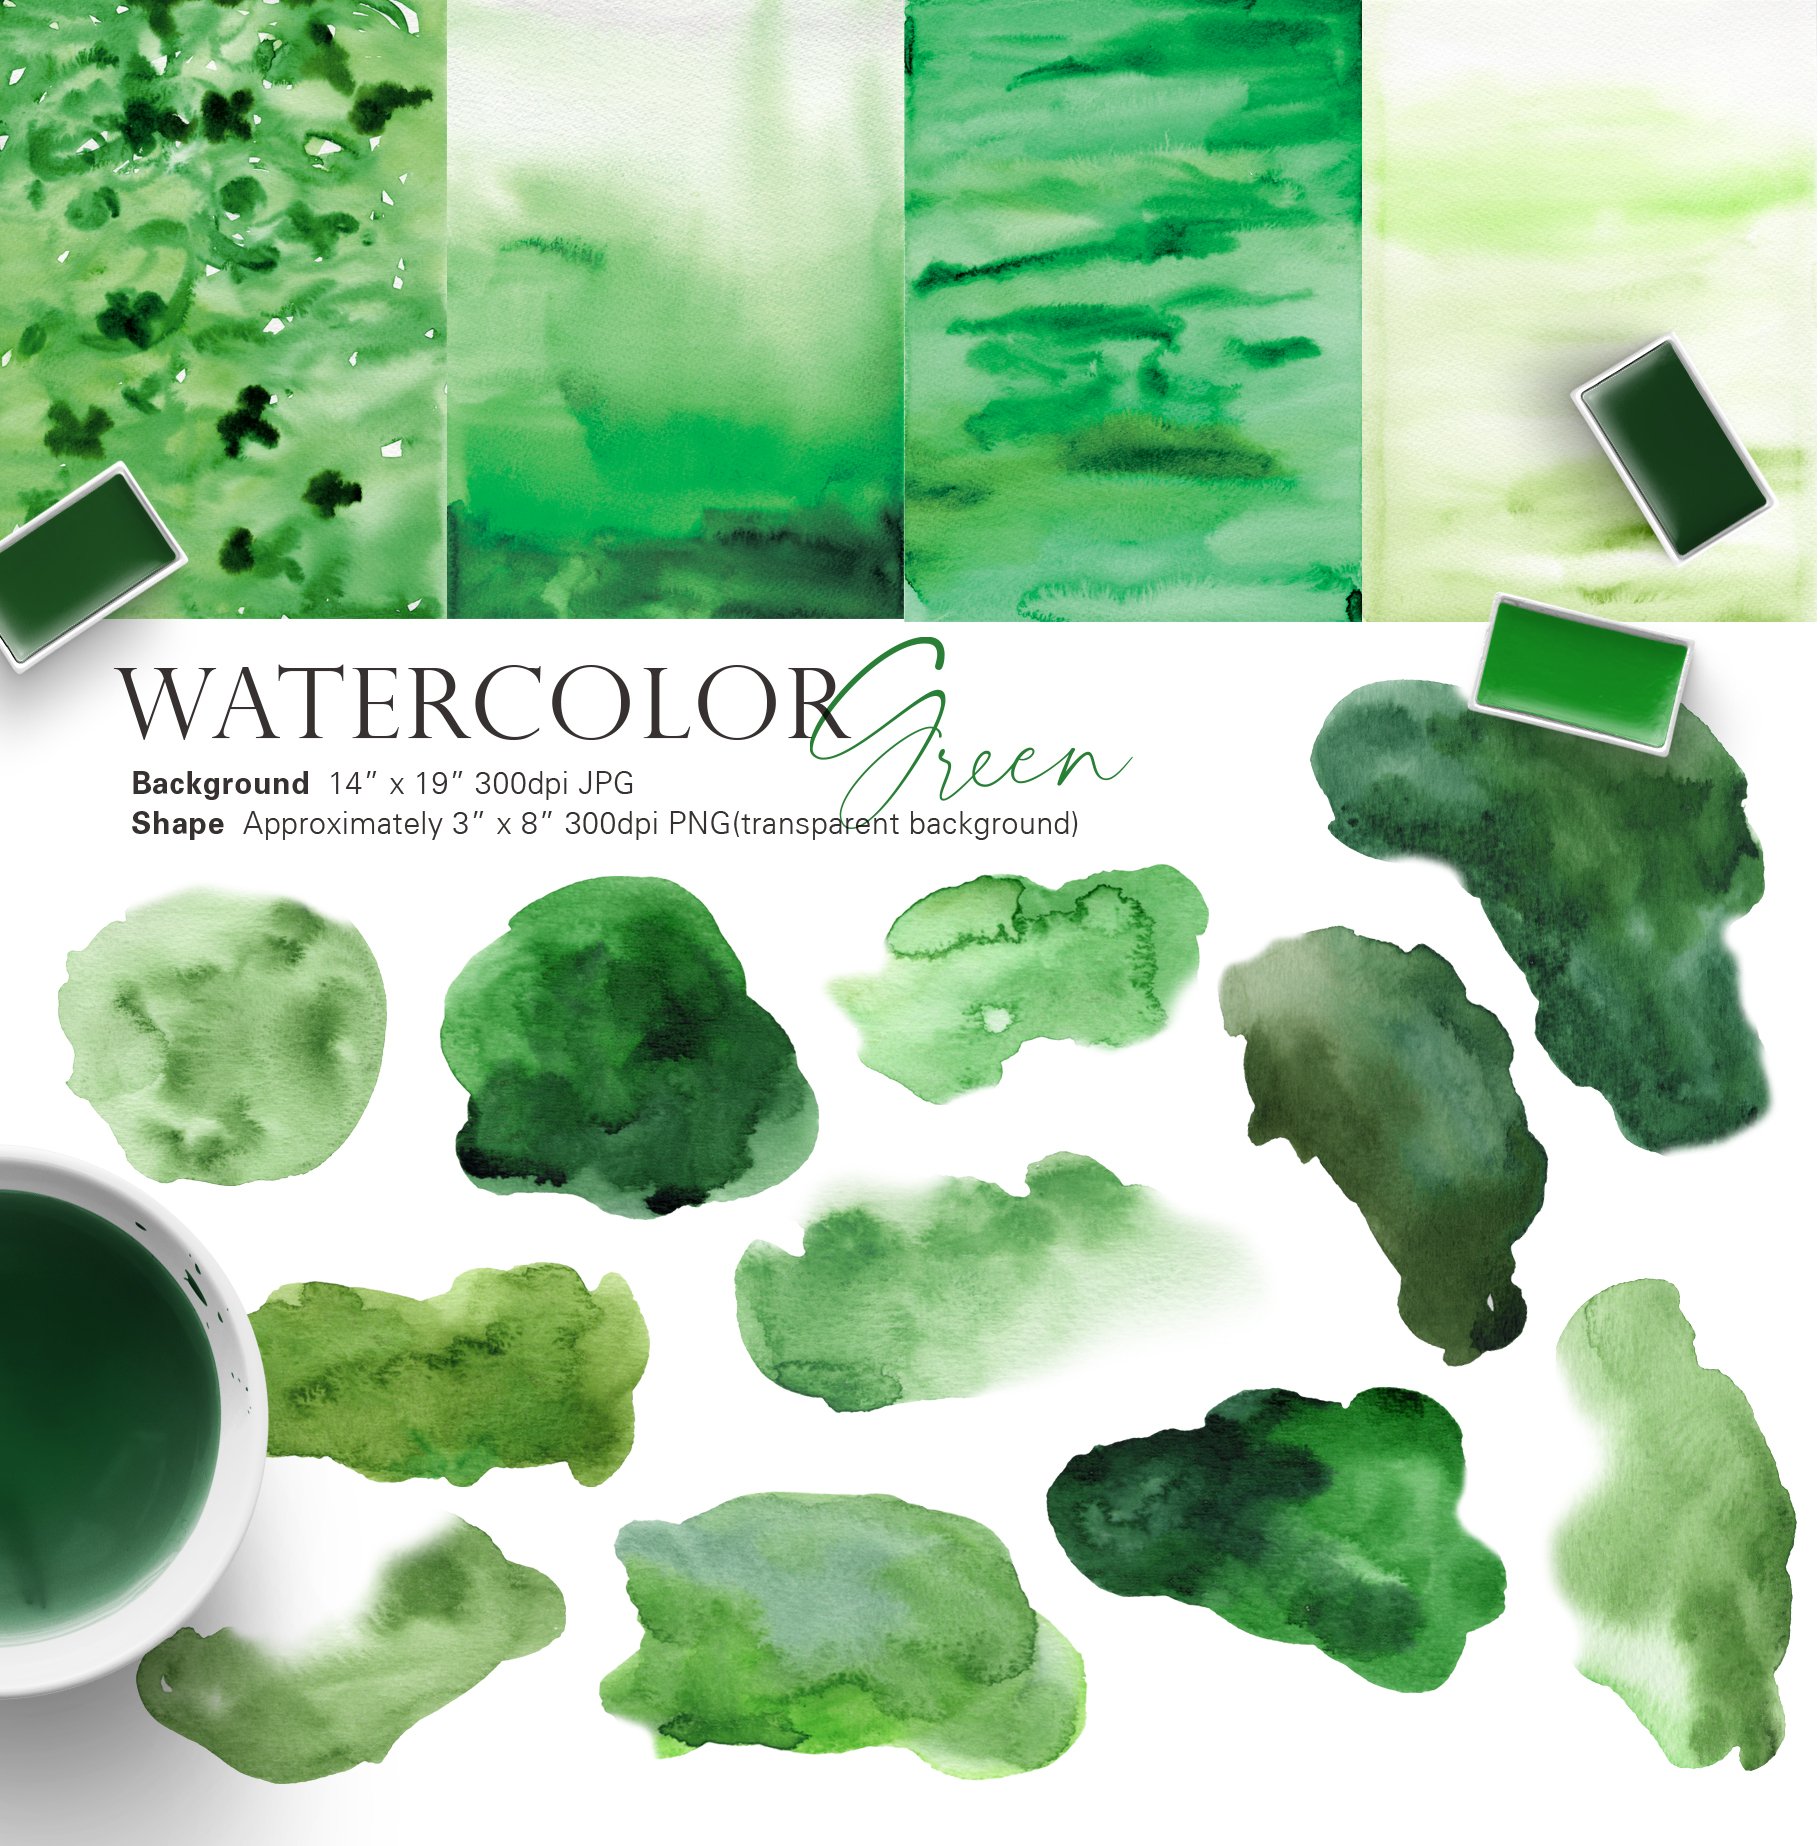 Green watercolor background with a cup of coffee.